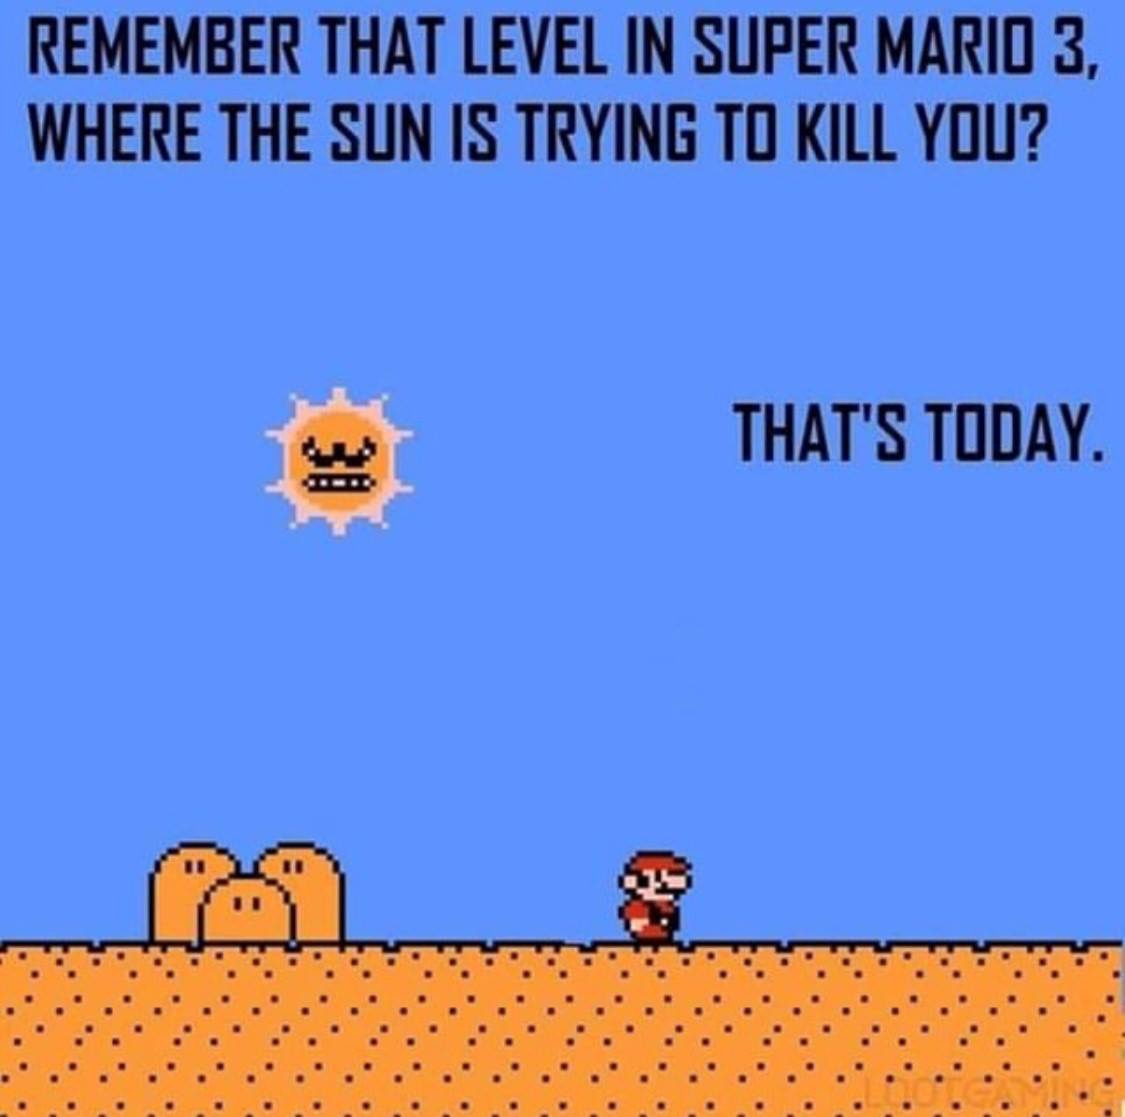 super mario 3 sun level - Remember That Level In Super Mario 3, Where The Sun Is Trying To Kill You? That'S Today.